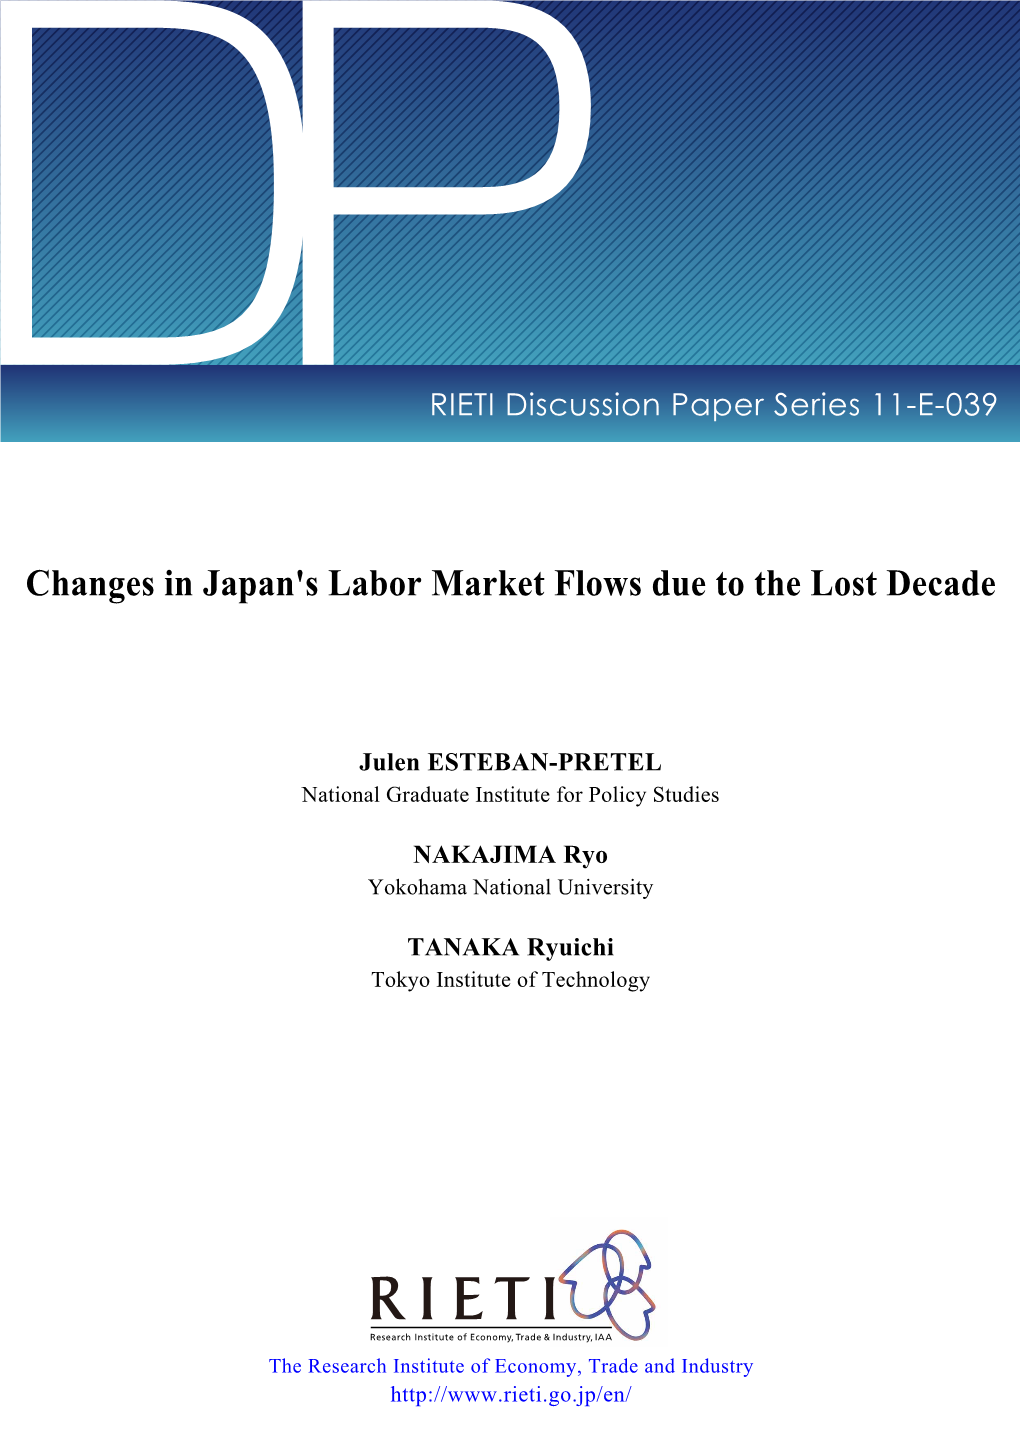 Changes in Japan's Labor Market Flows Due to the Lost Decade